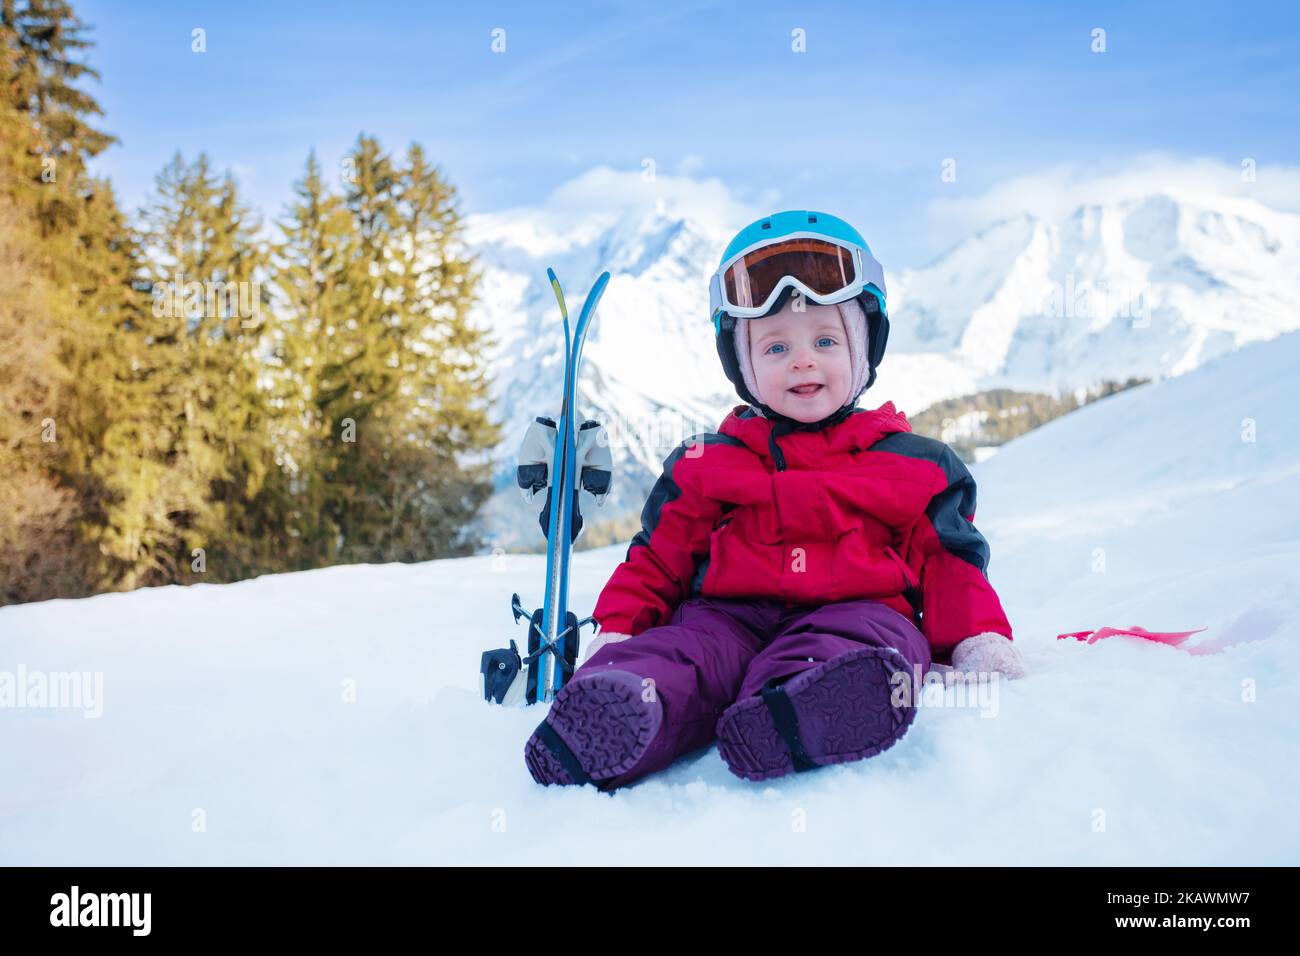 Little girl sit on snow with mountain ski in sport outfit Stock Photo